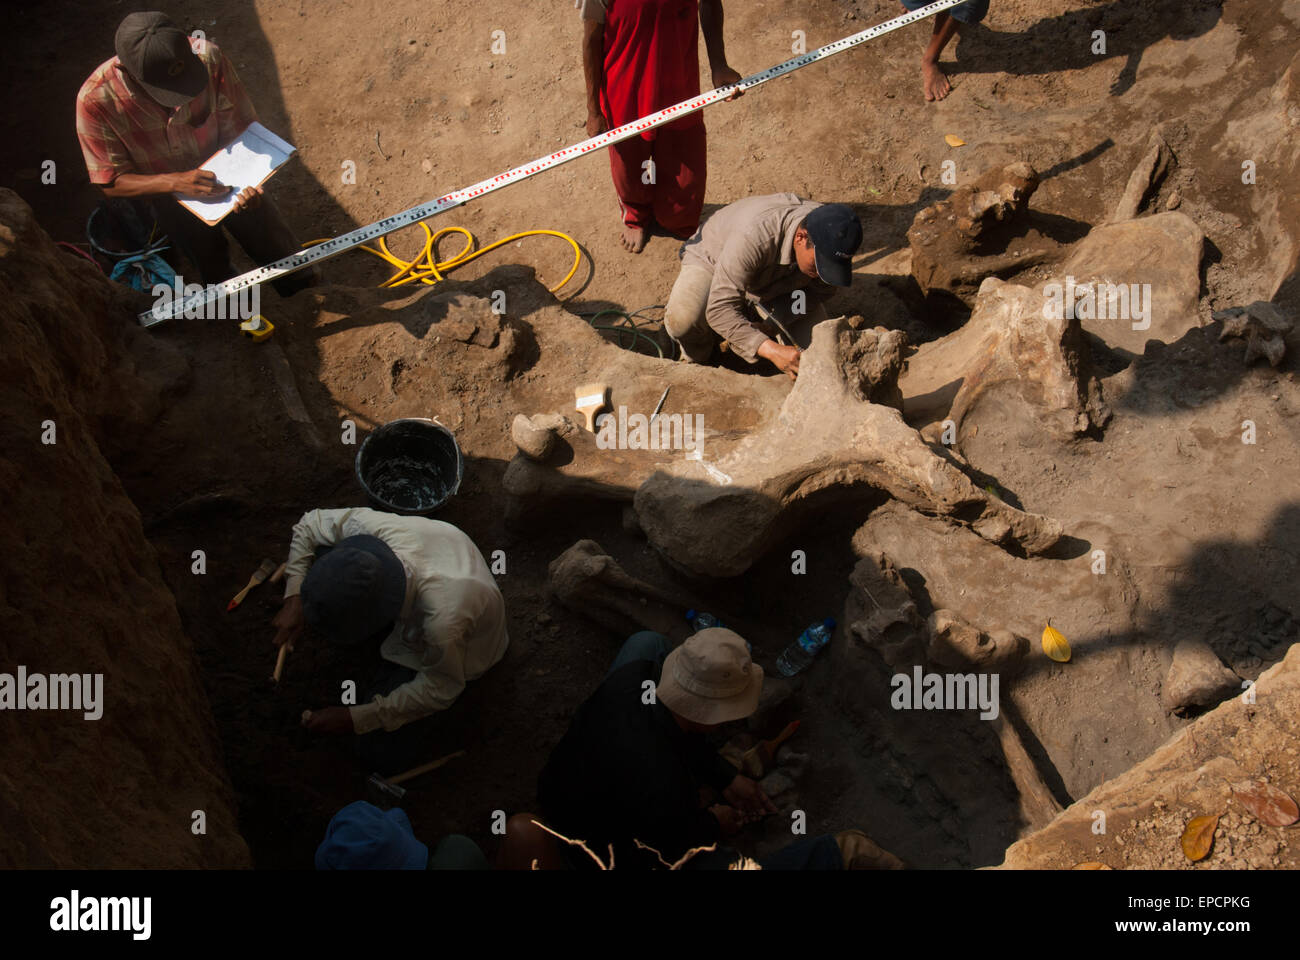 Paleontologists and villagers are working on the excavation of fossilized bones of an extinct elephant species, Elephas hysudrindicus, in Indonesia. Stock Photo